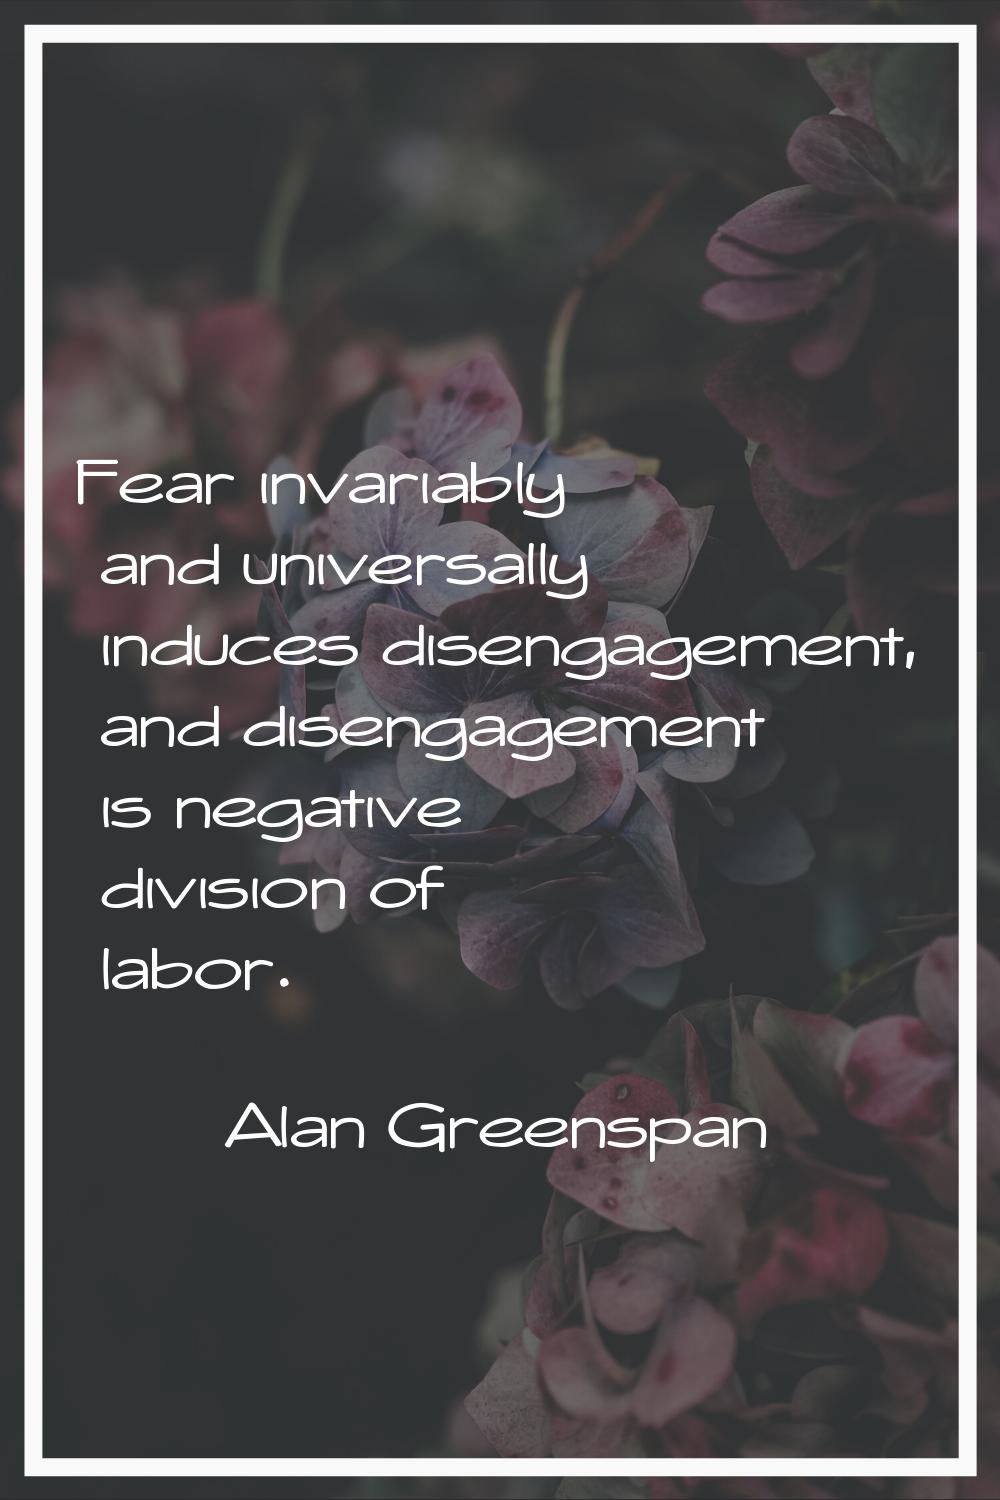 Fear invariably and universally induces disengagement, and disengagement is negative division of la